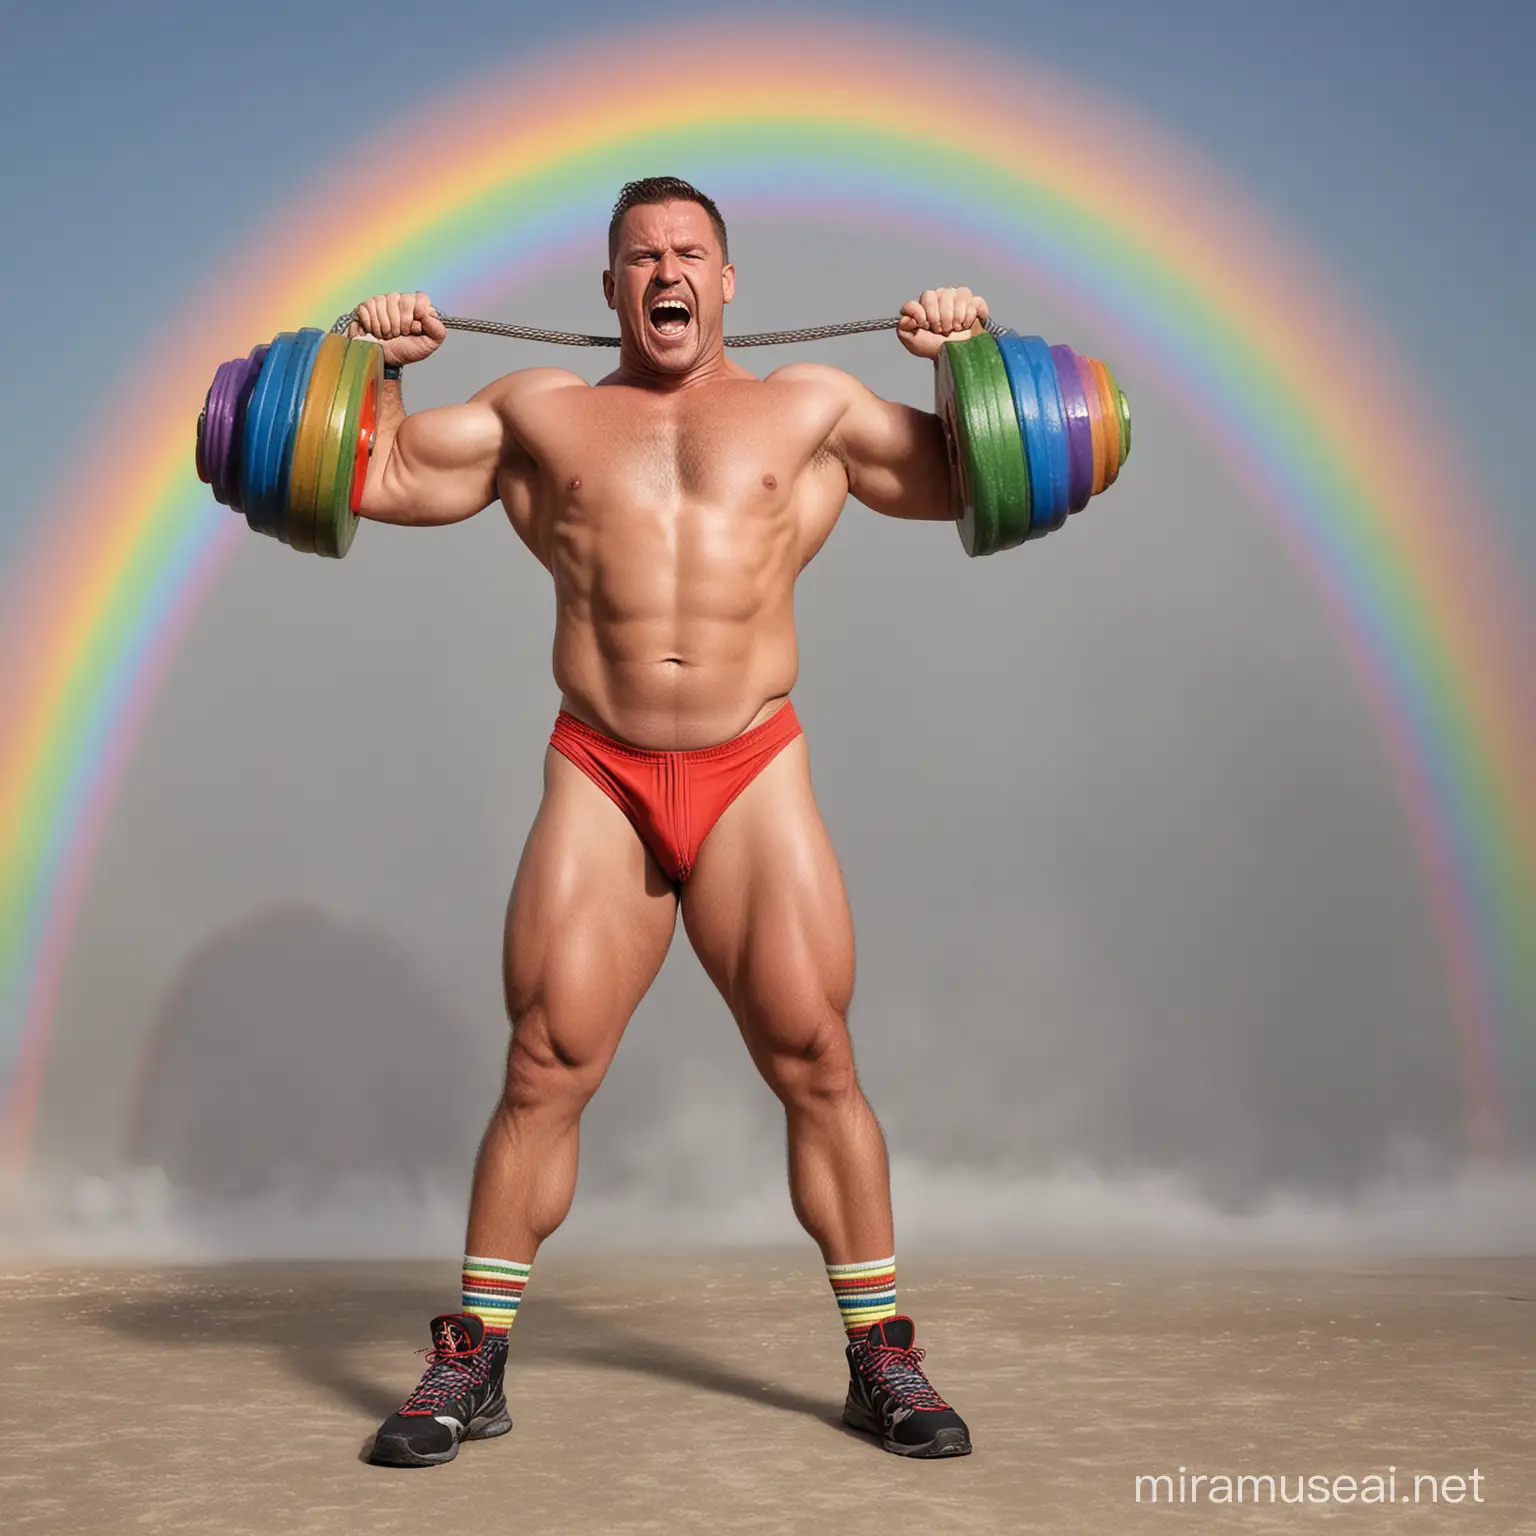 Topless 30s Ultra Muscular World's Strongest Man doing excise with Big Bright Rainbow Coloured Heavy Weights